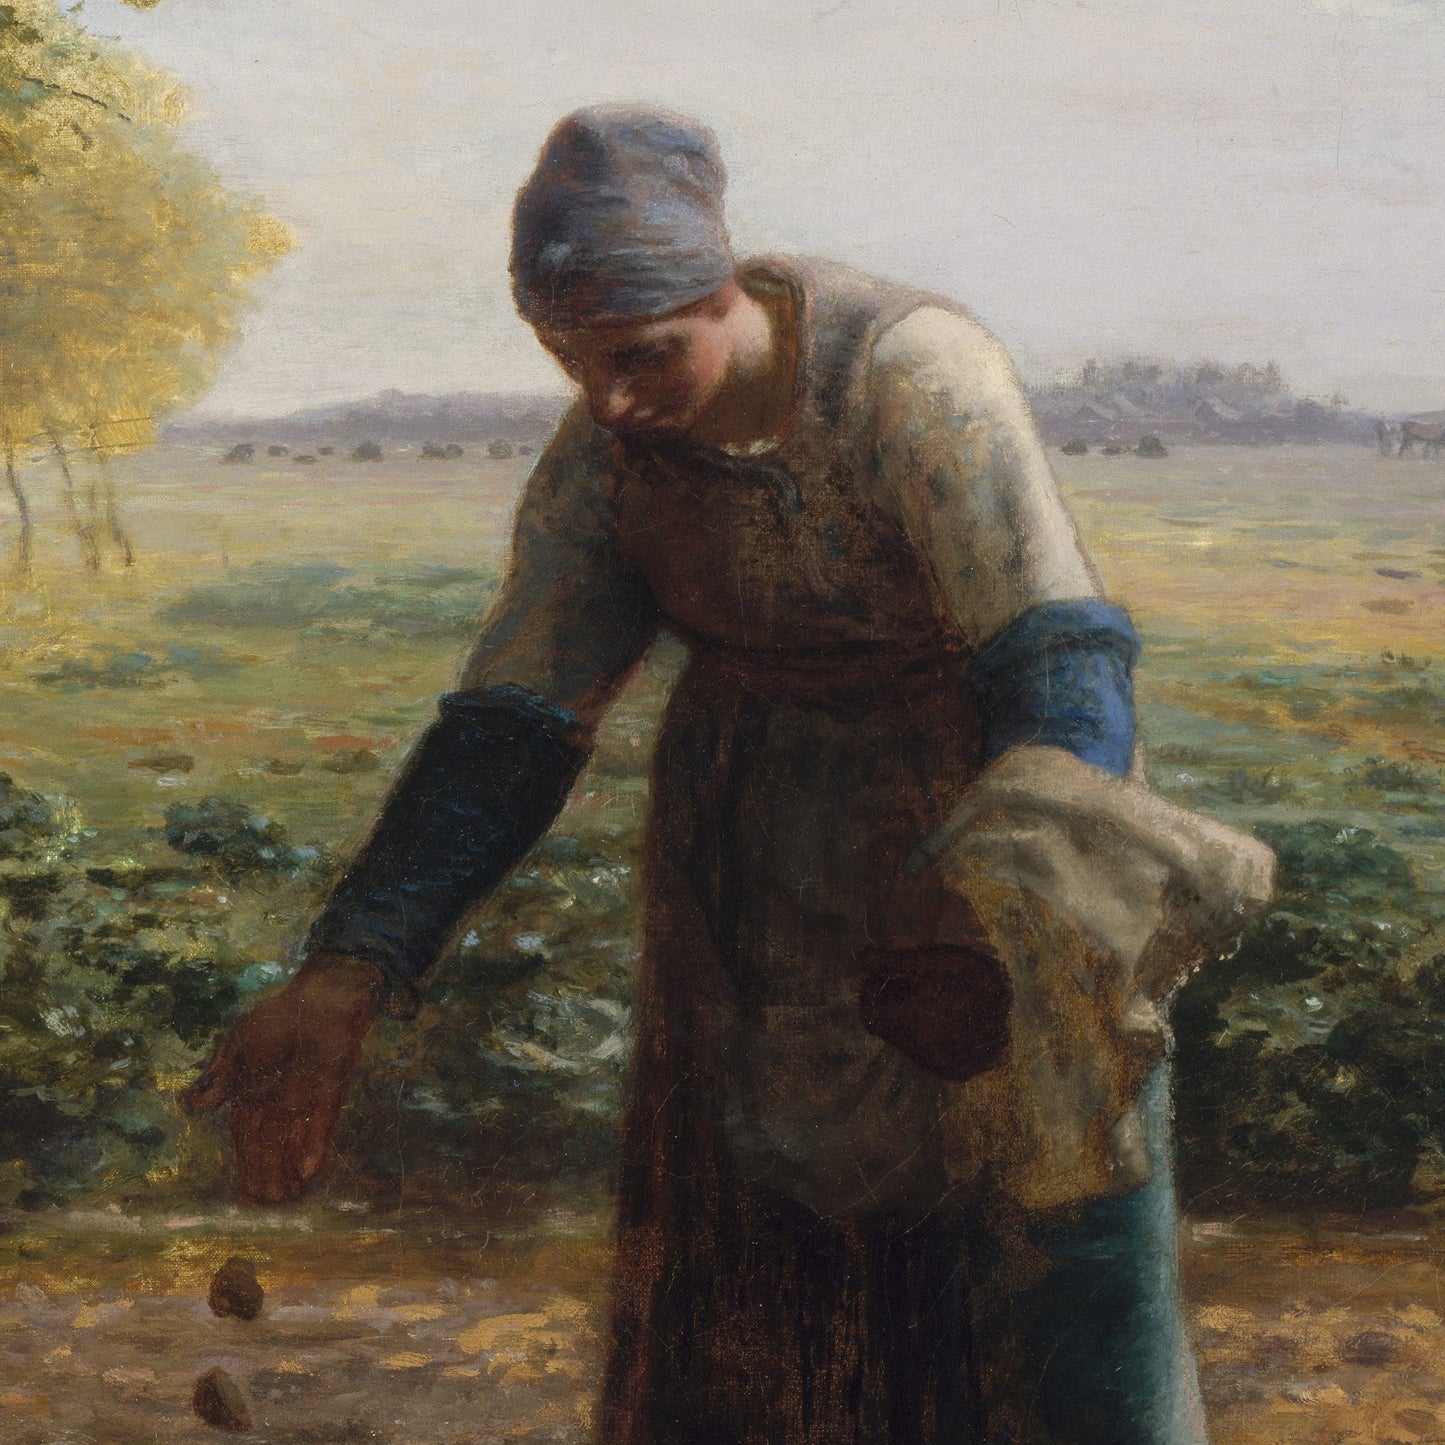 Potato Planters by Jean-François Millet, 3d Printed with texture and brush strokes looks like original oil-painting, code:137